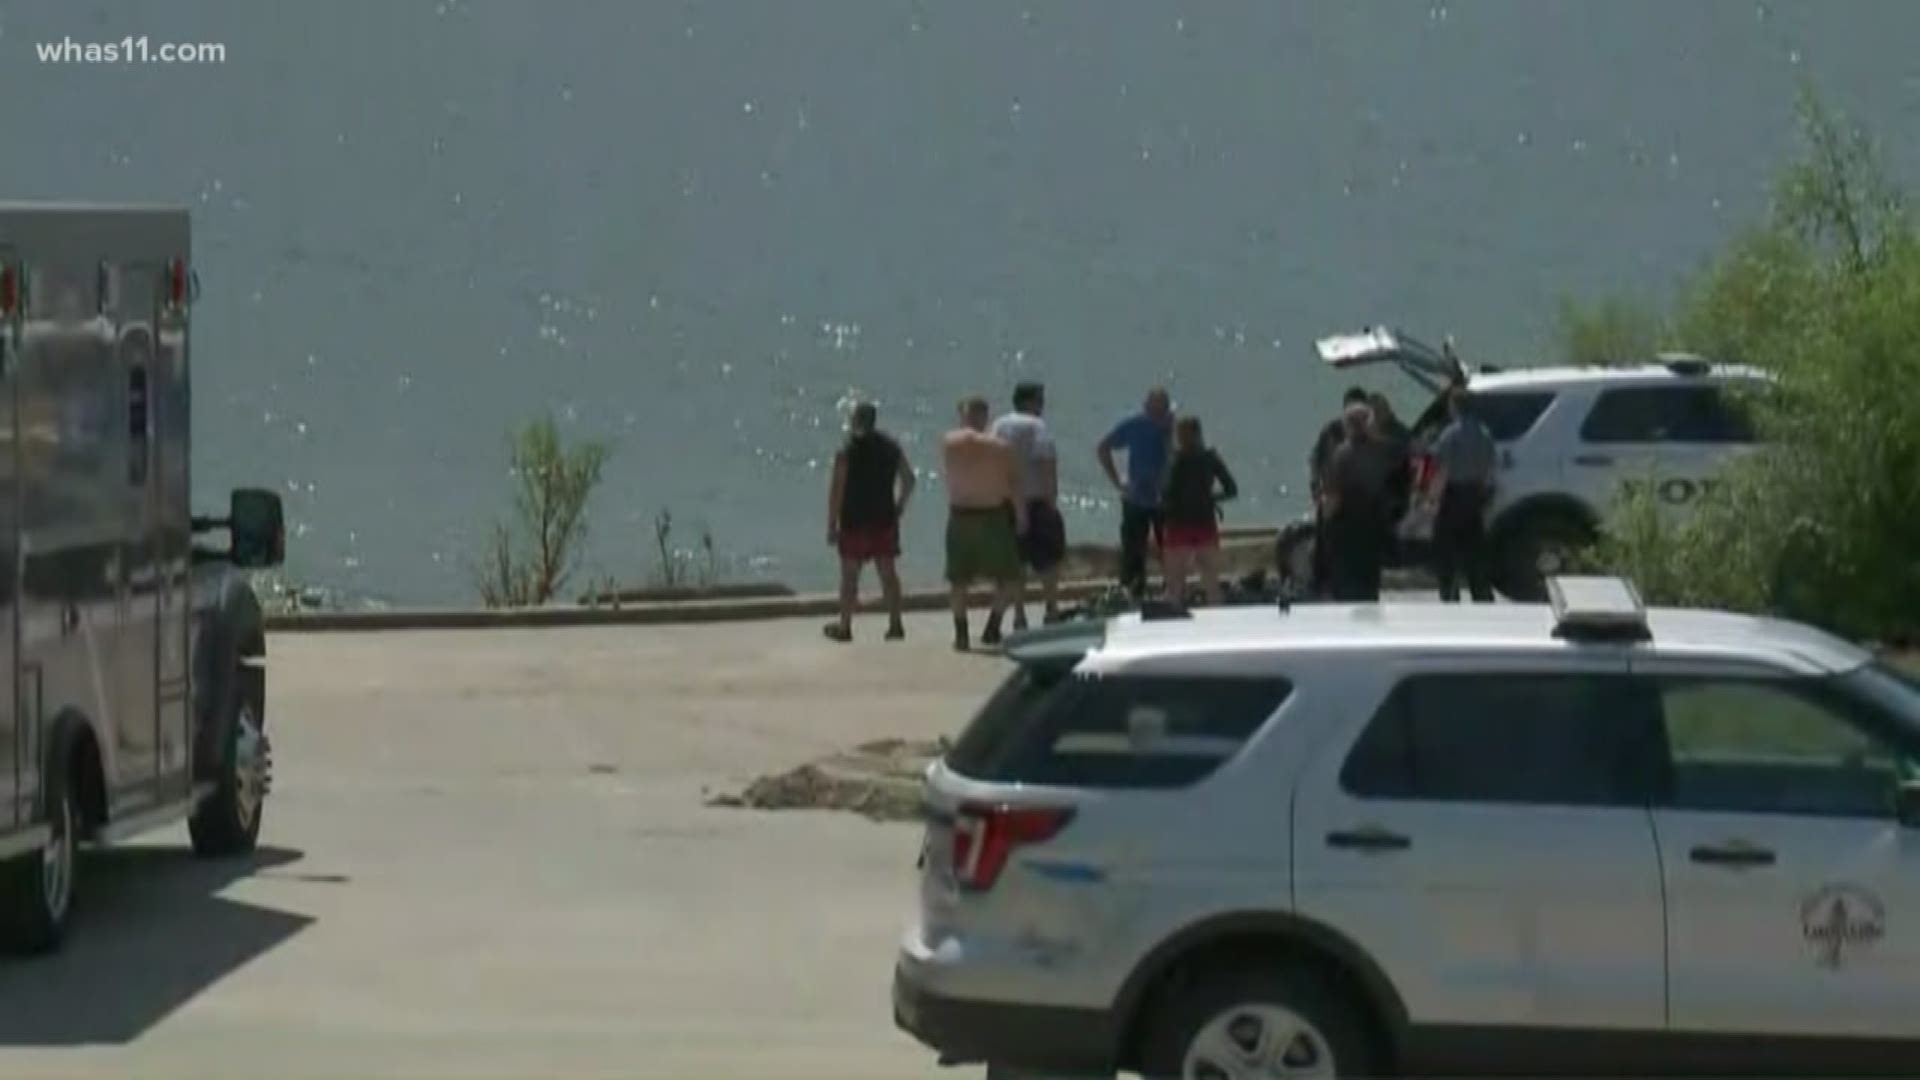 Authorities are searching for a man after he went underwater during a boating incident on the Ohio River near the Greenwood Boat Docks.